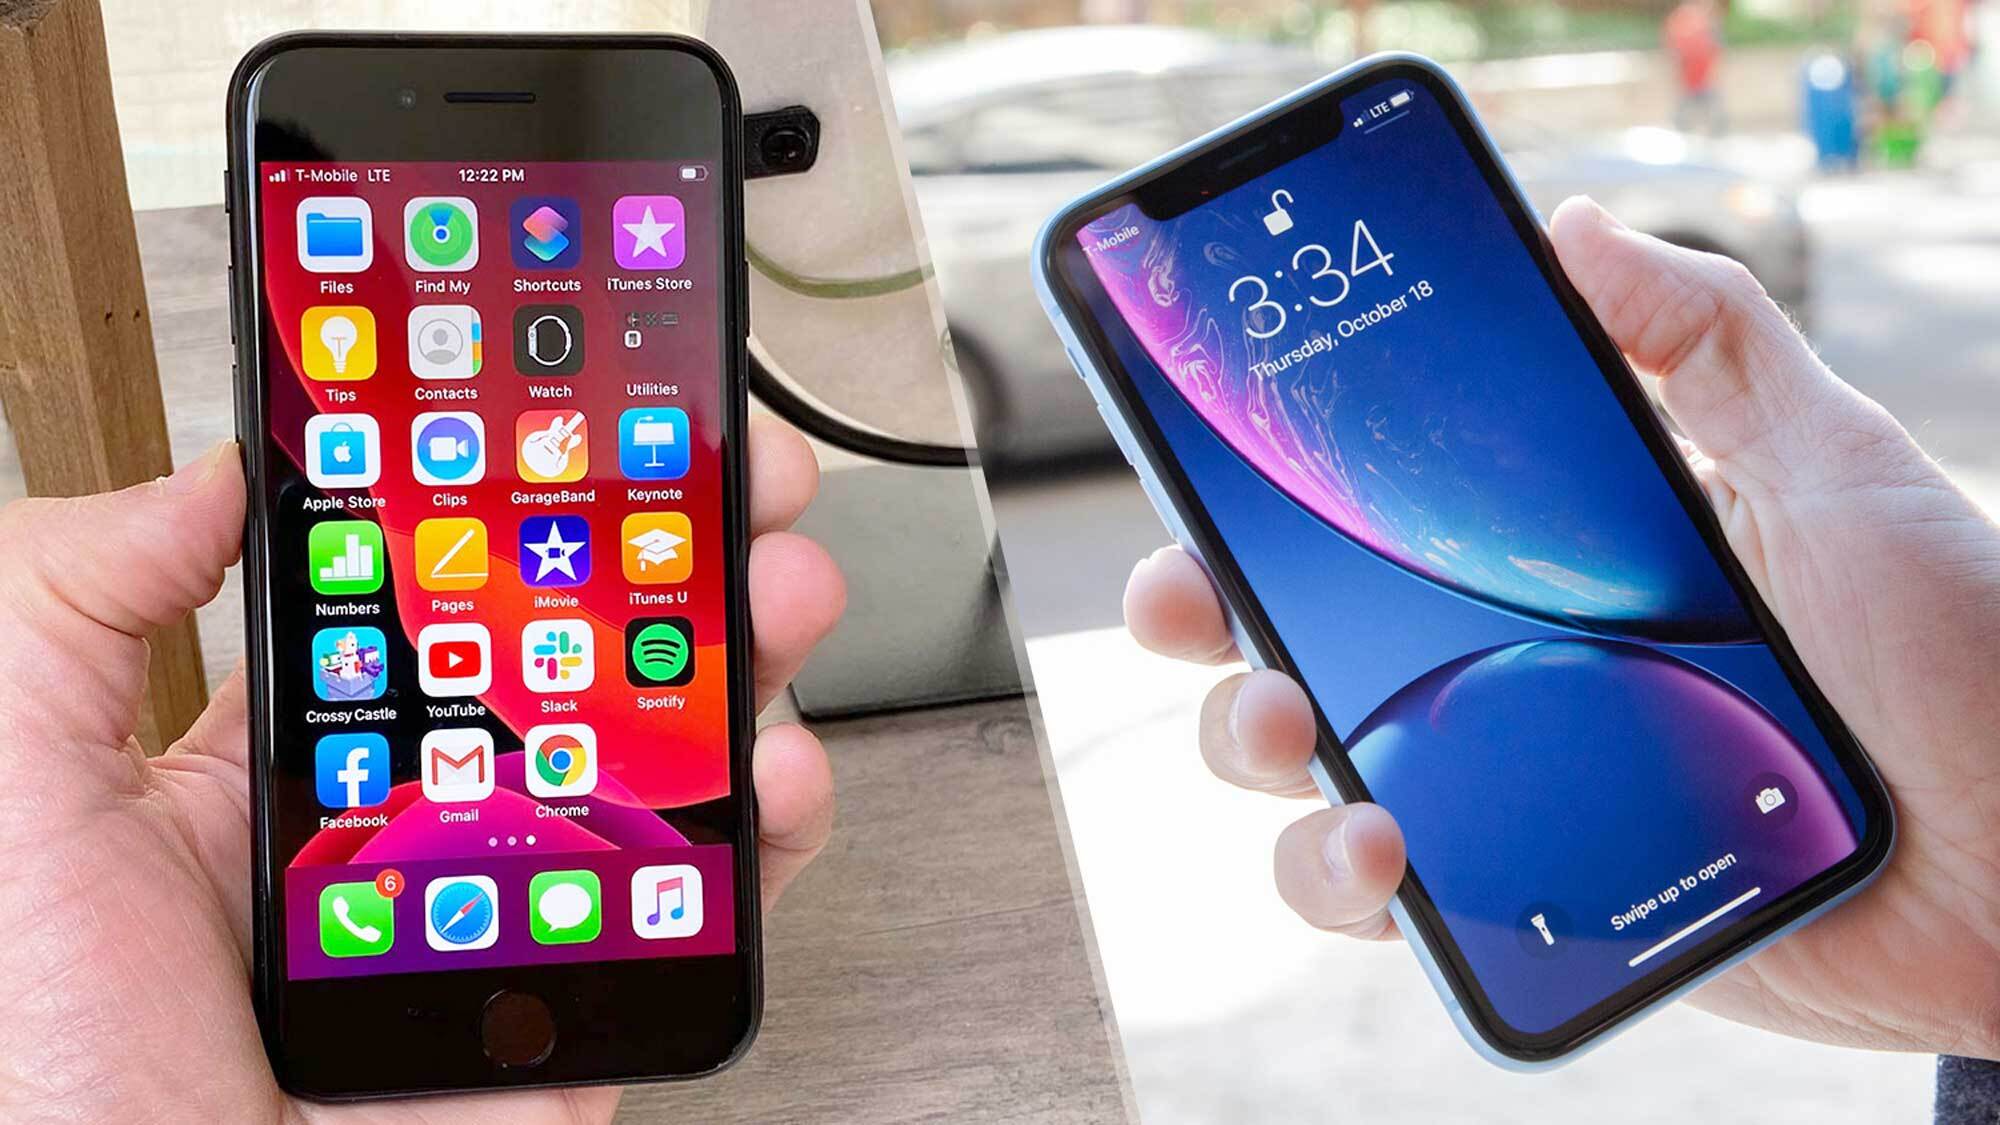 The best cheap iPhone — is it iPhone SE or iPhone XR? Tom's Guide